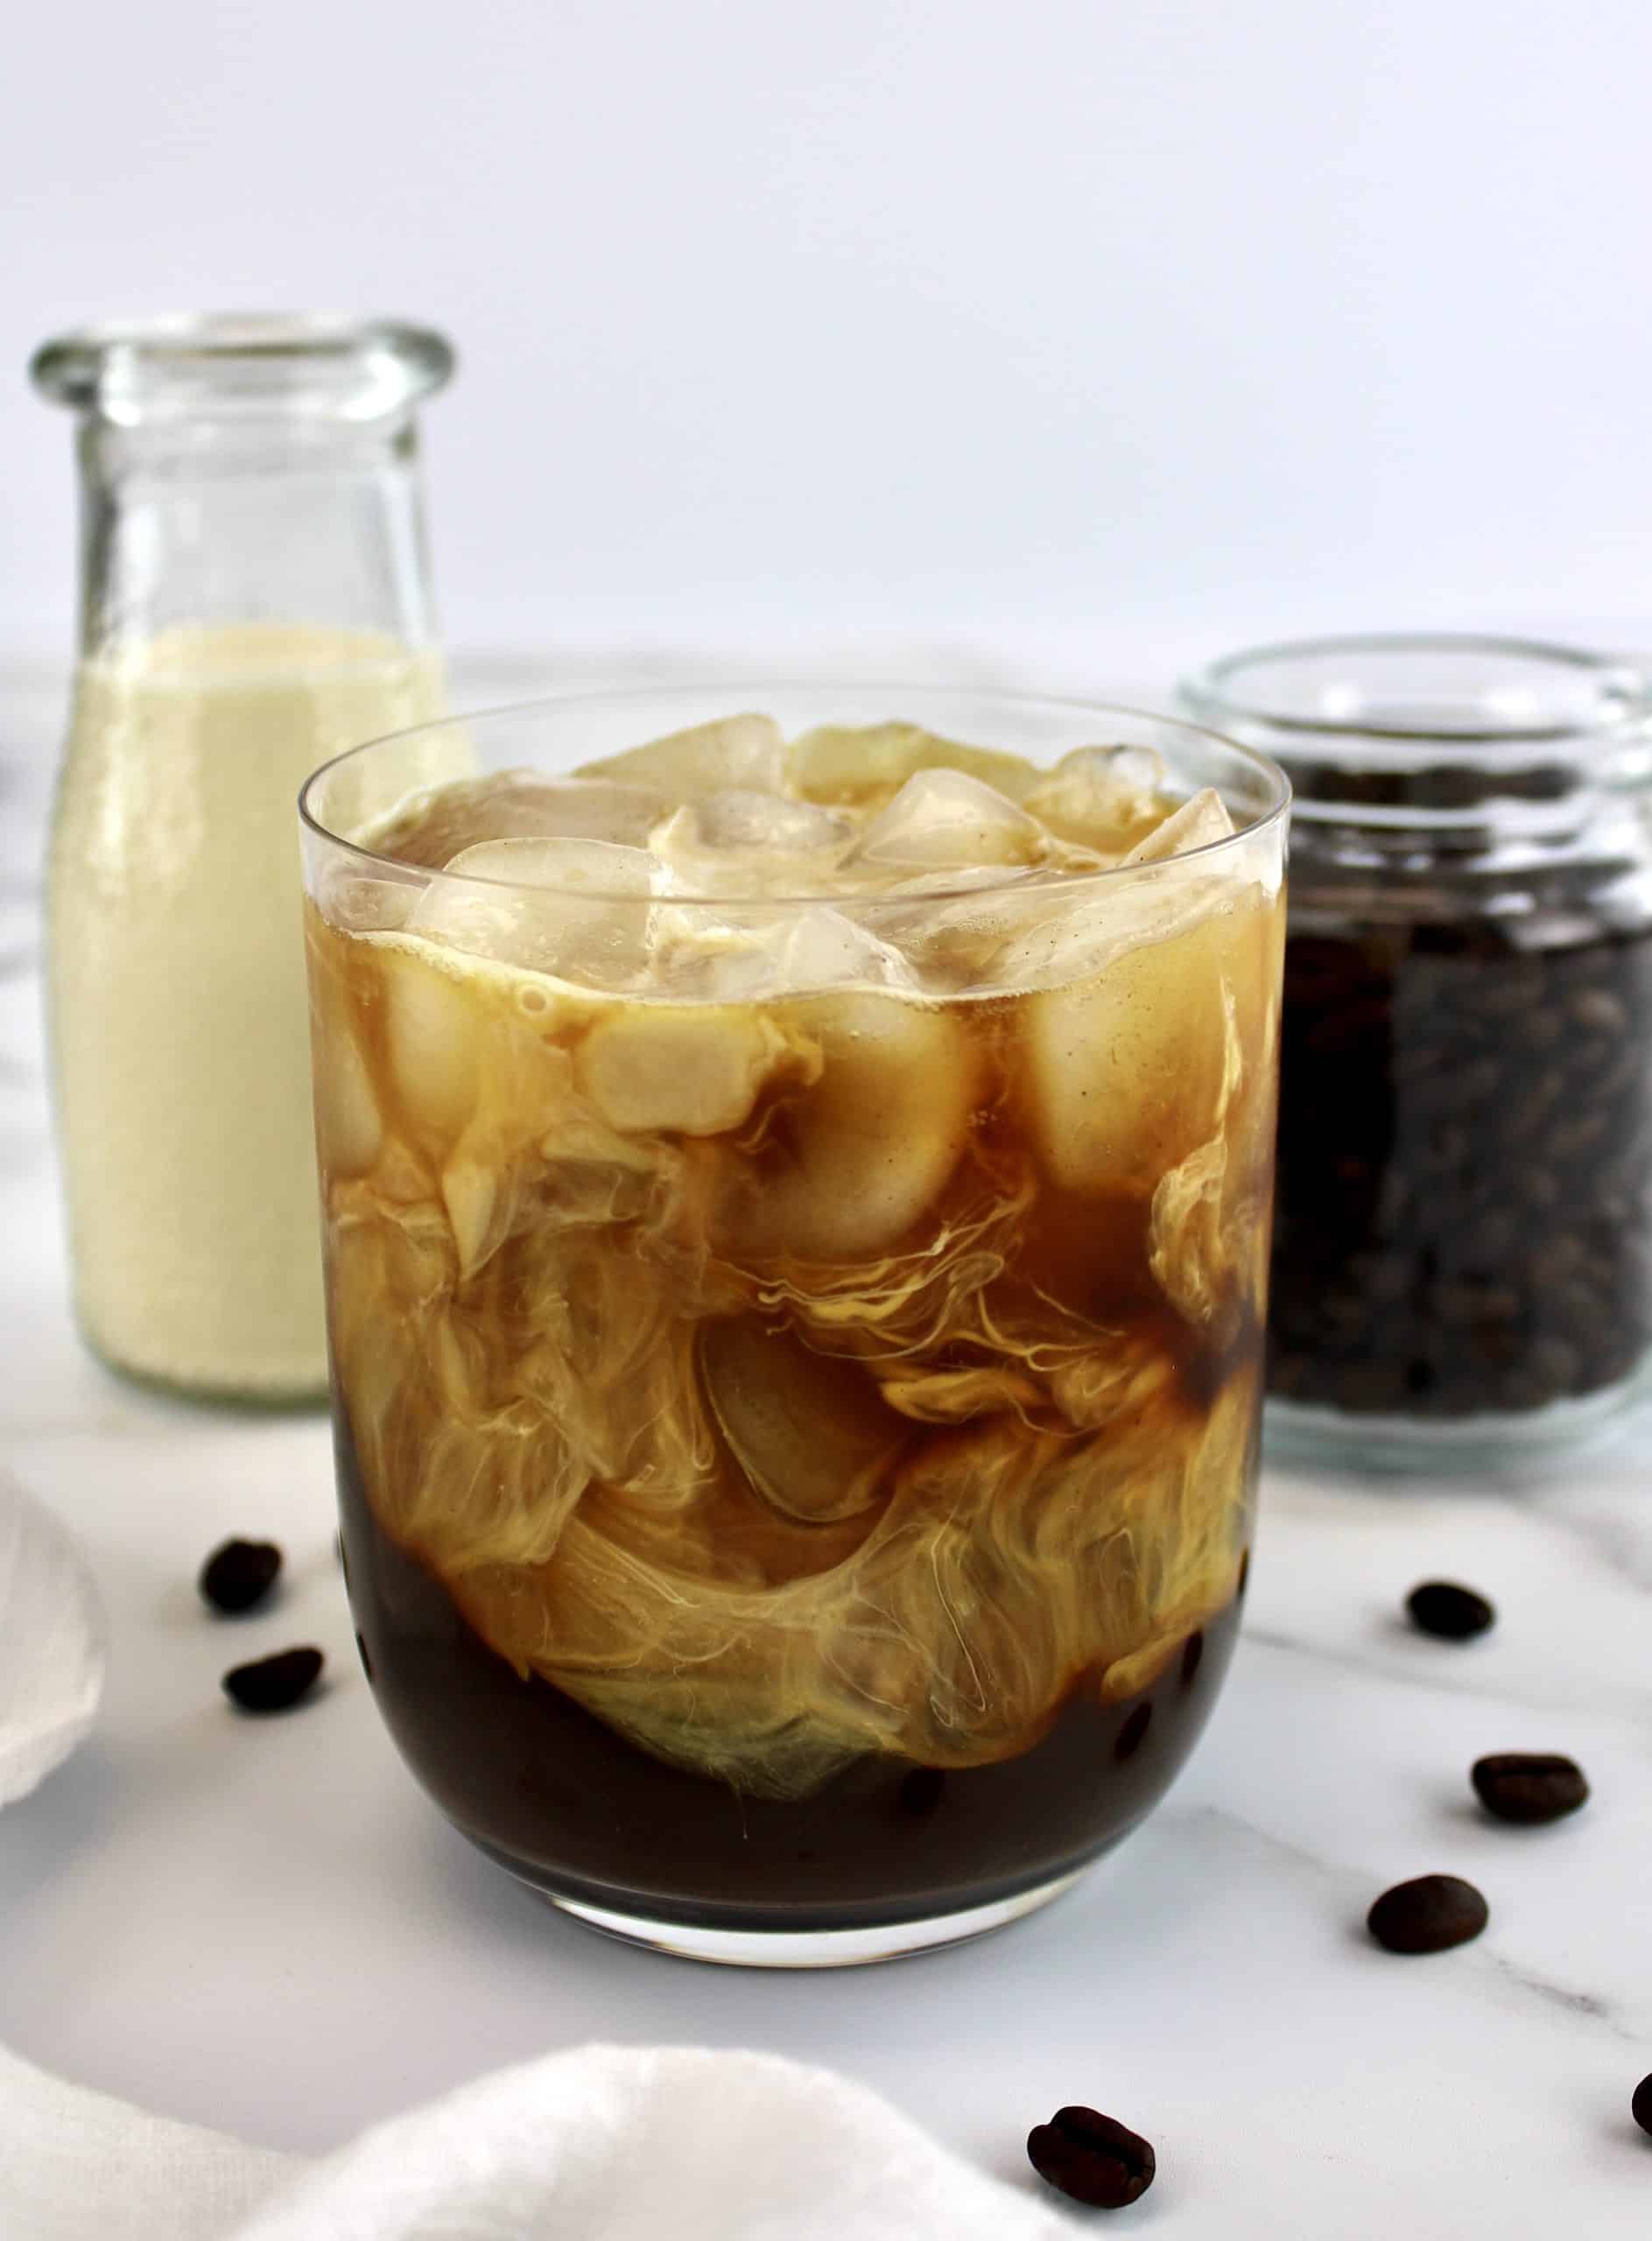 Cold Brew Coffee - Keto Cooking Christian